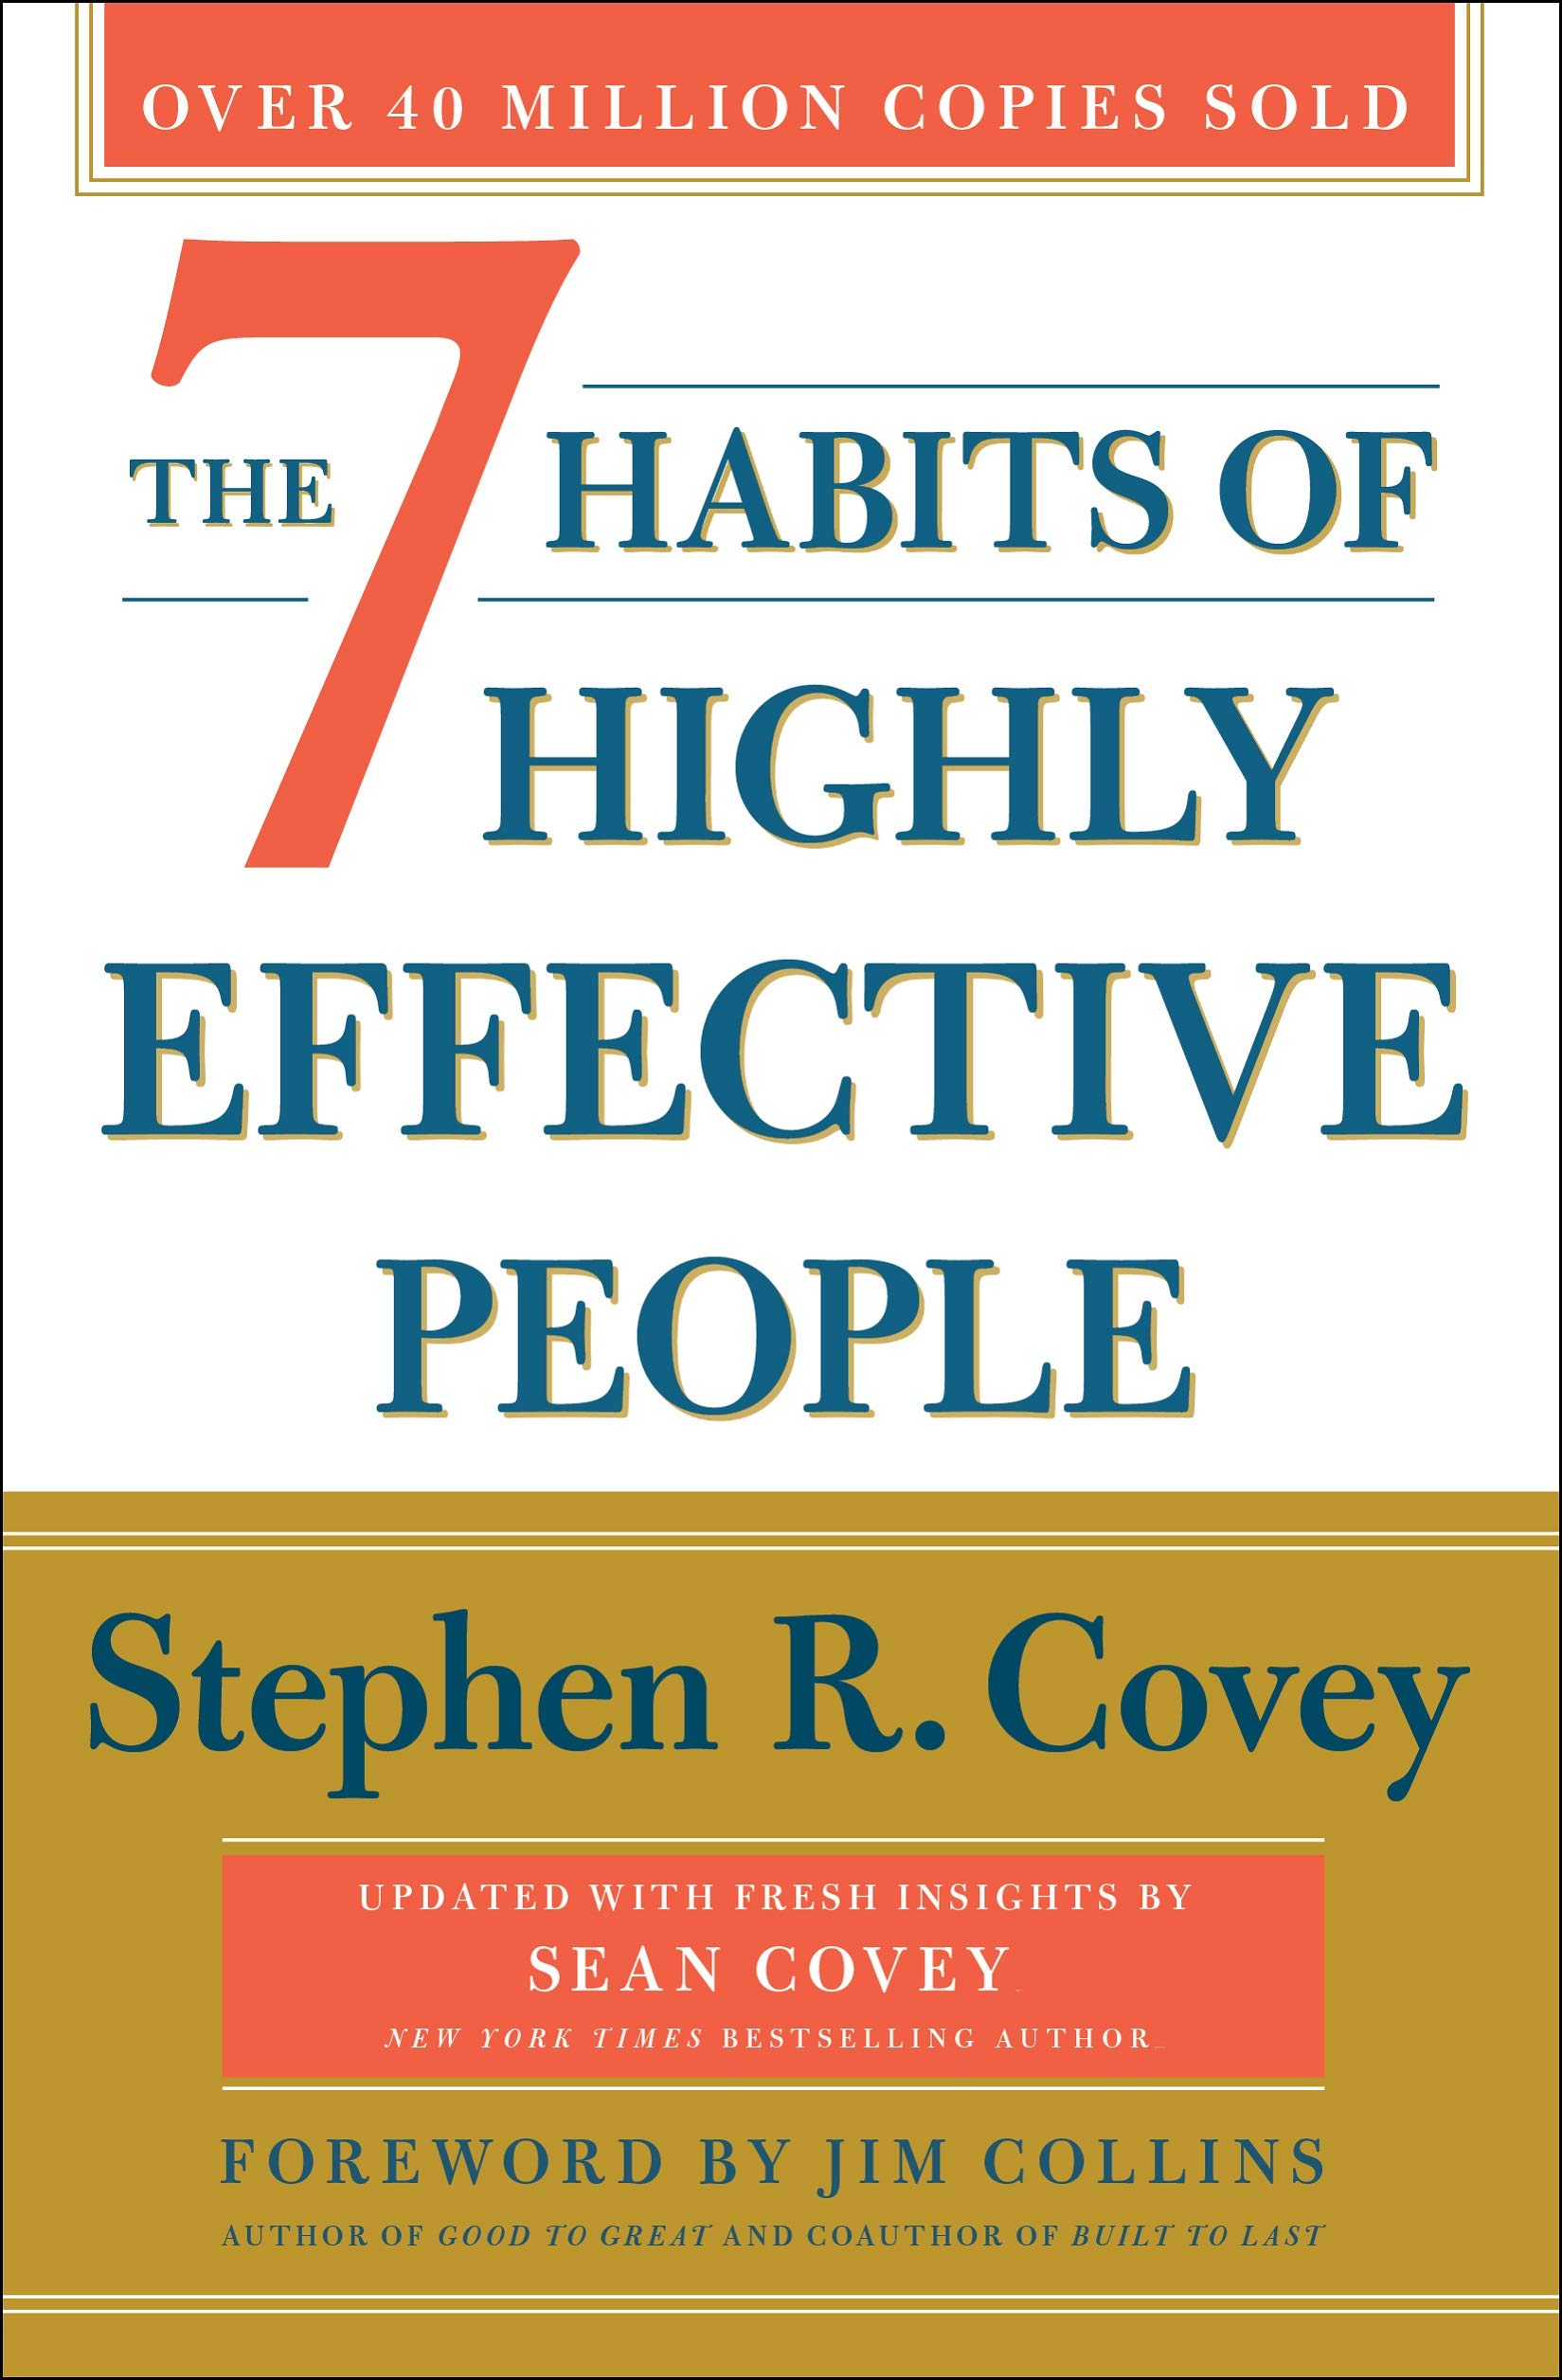 Master the Art of Personal and Professional Success with “The 7 Habits of Highly Effective People”